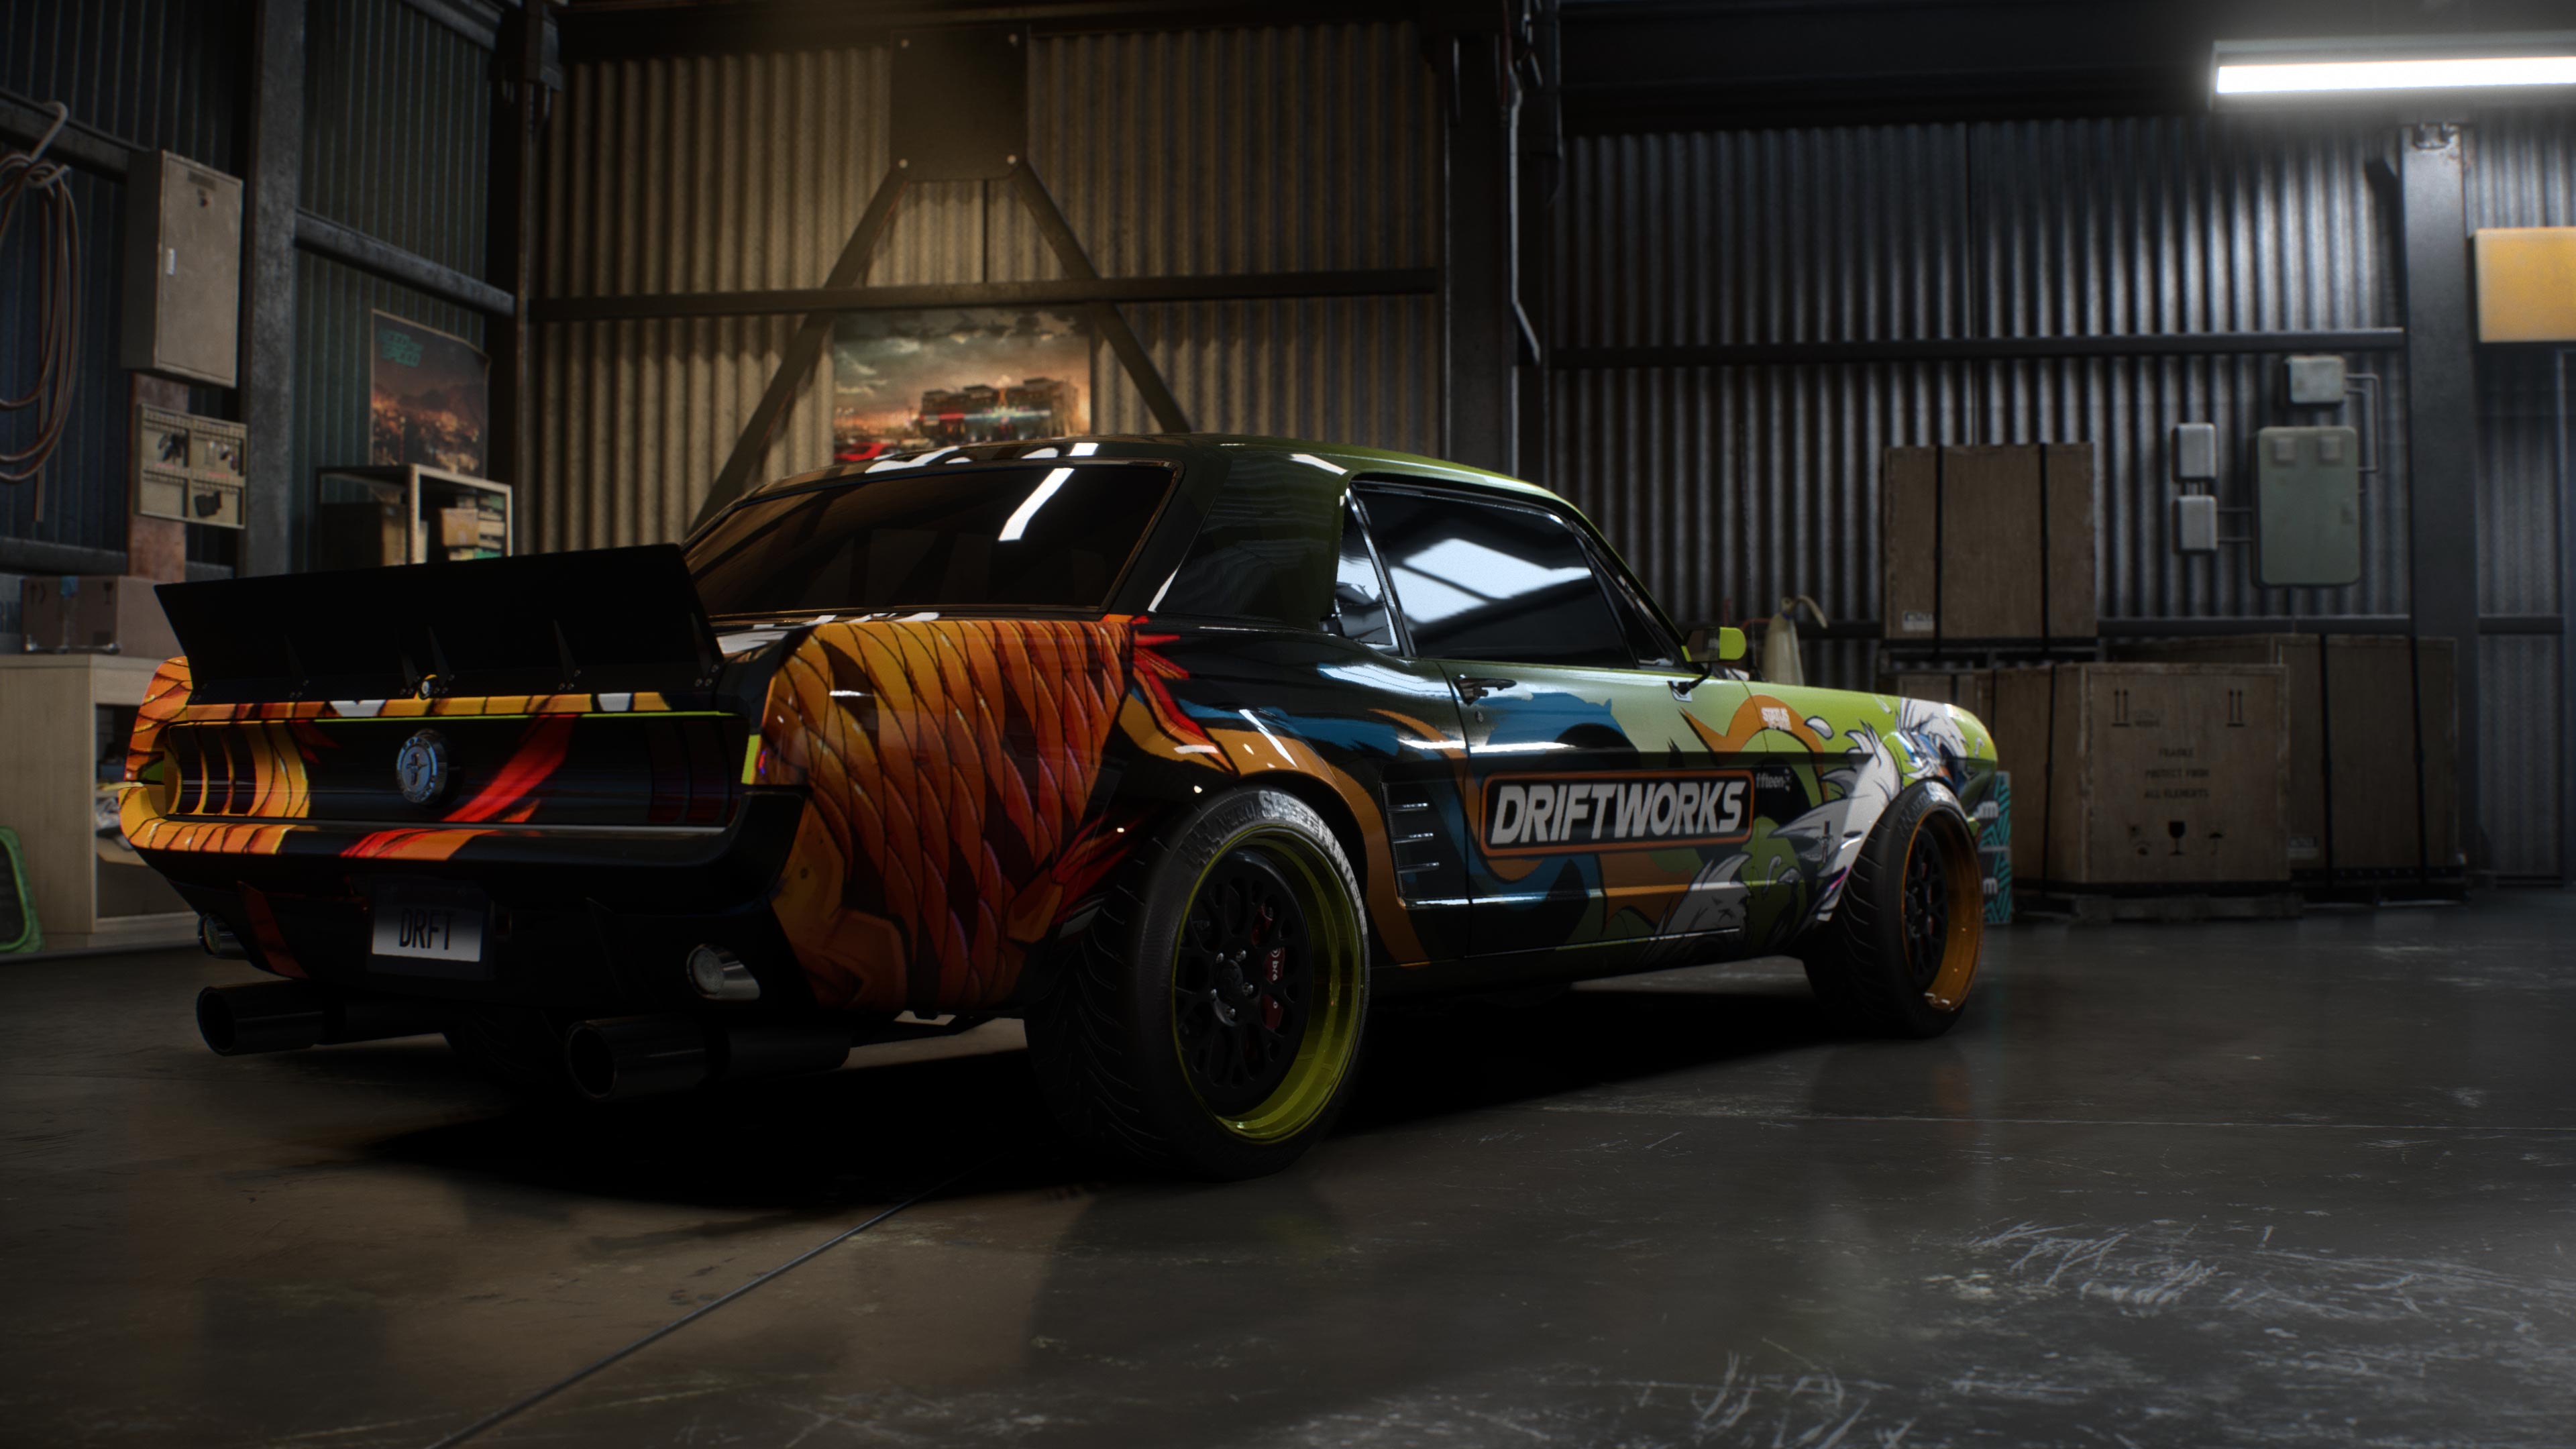 Мустанг payback. Ford Mustang 1965 NFS Payback Hoonicorn. Ford Mustang NFS Payback. Ford Mustang 67 NFS Payback. Need for Speed Payback Ford Mustang 1965.